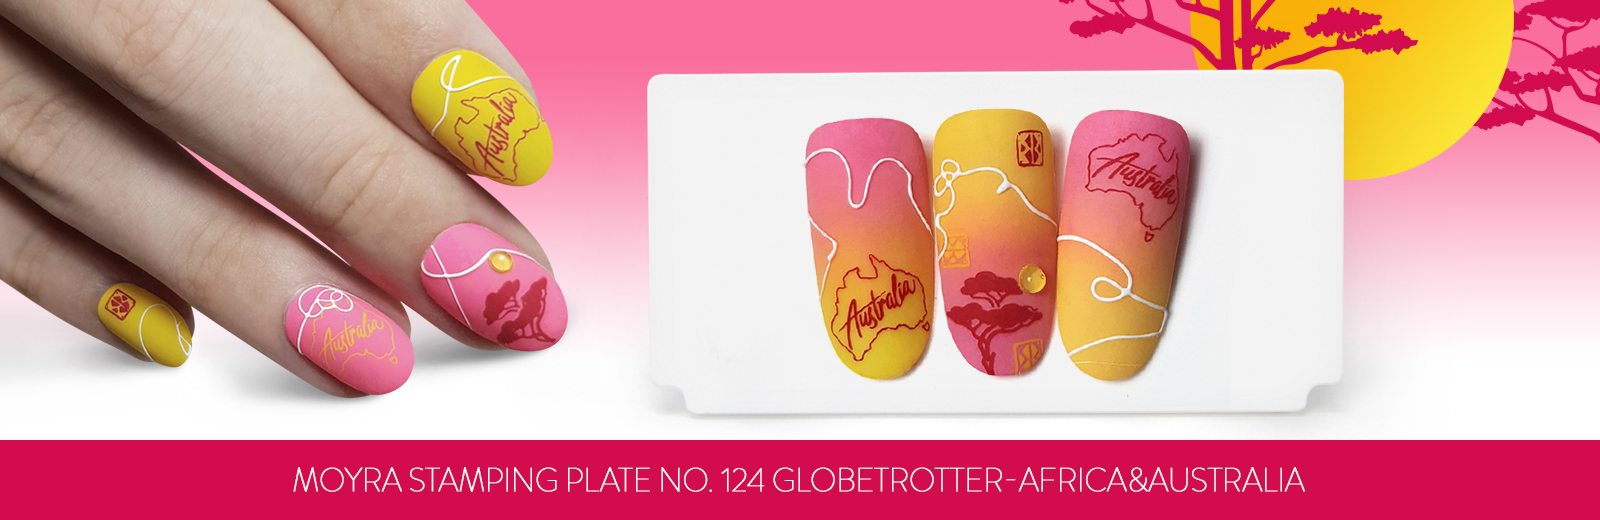 New stamping plate has arrived! No. 124 Globetrotter - Africa&Australia